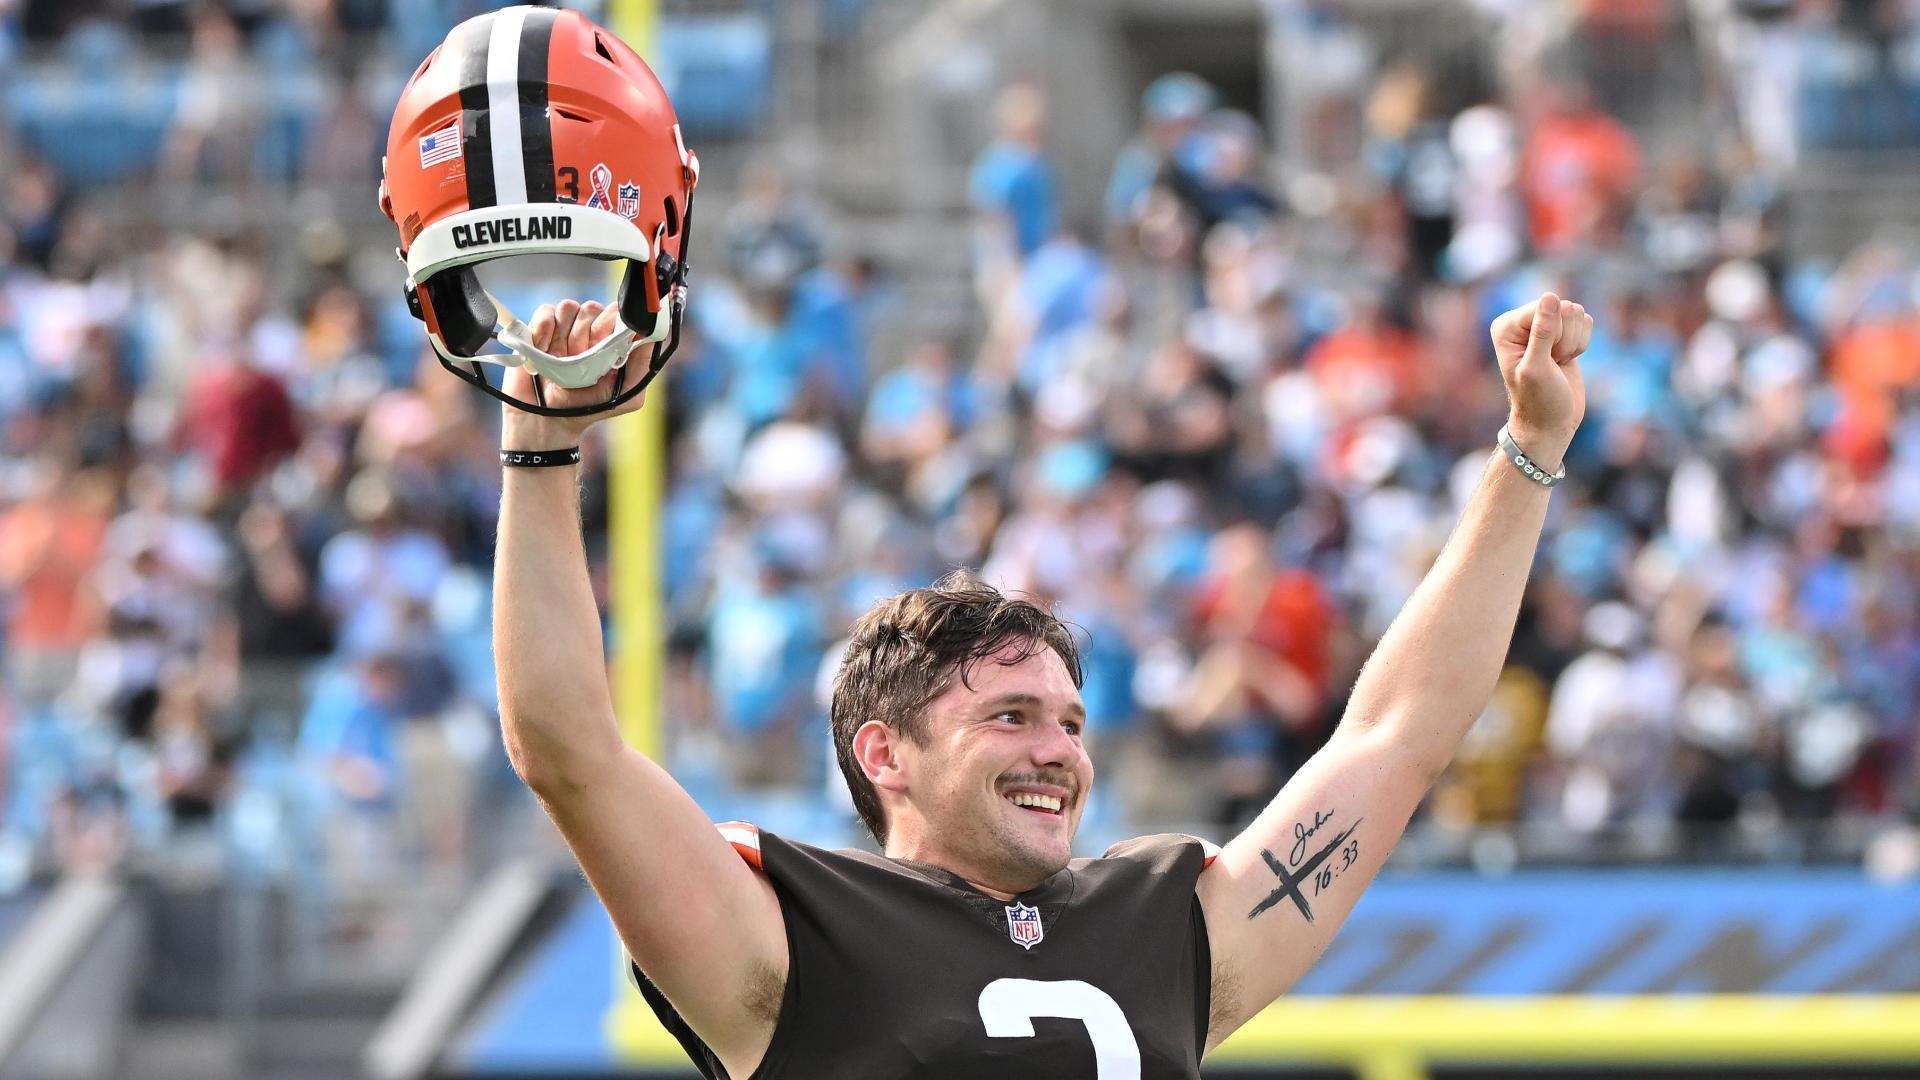 Browns at Panthers score: Baker Mayfield's quest for revenge comes up short  as Cleveland boots Carolina late 